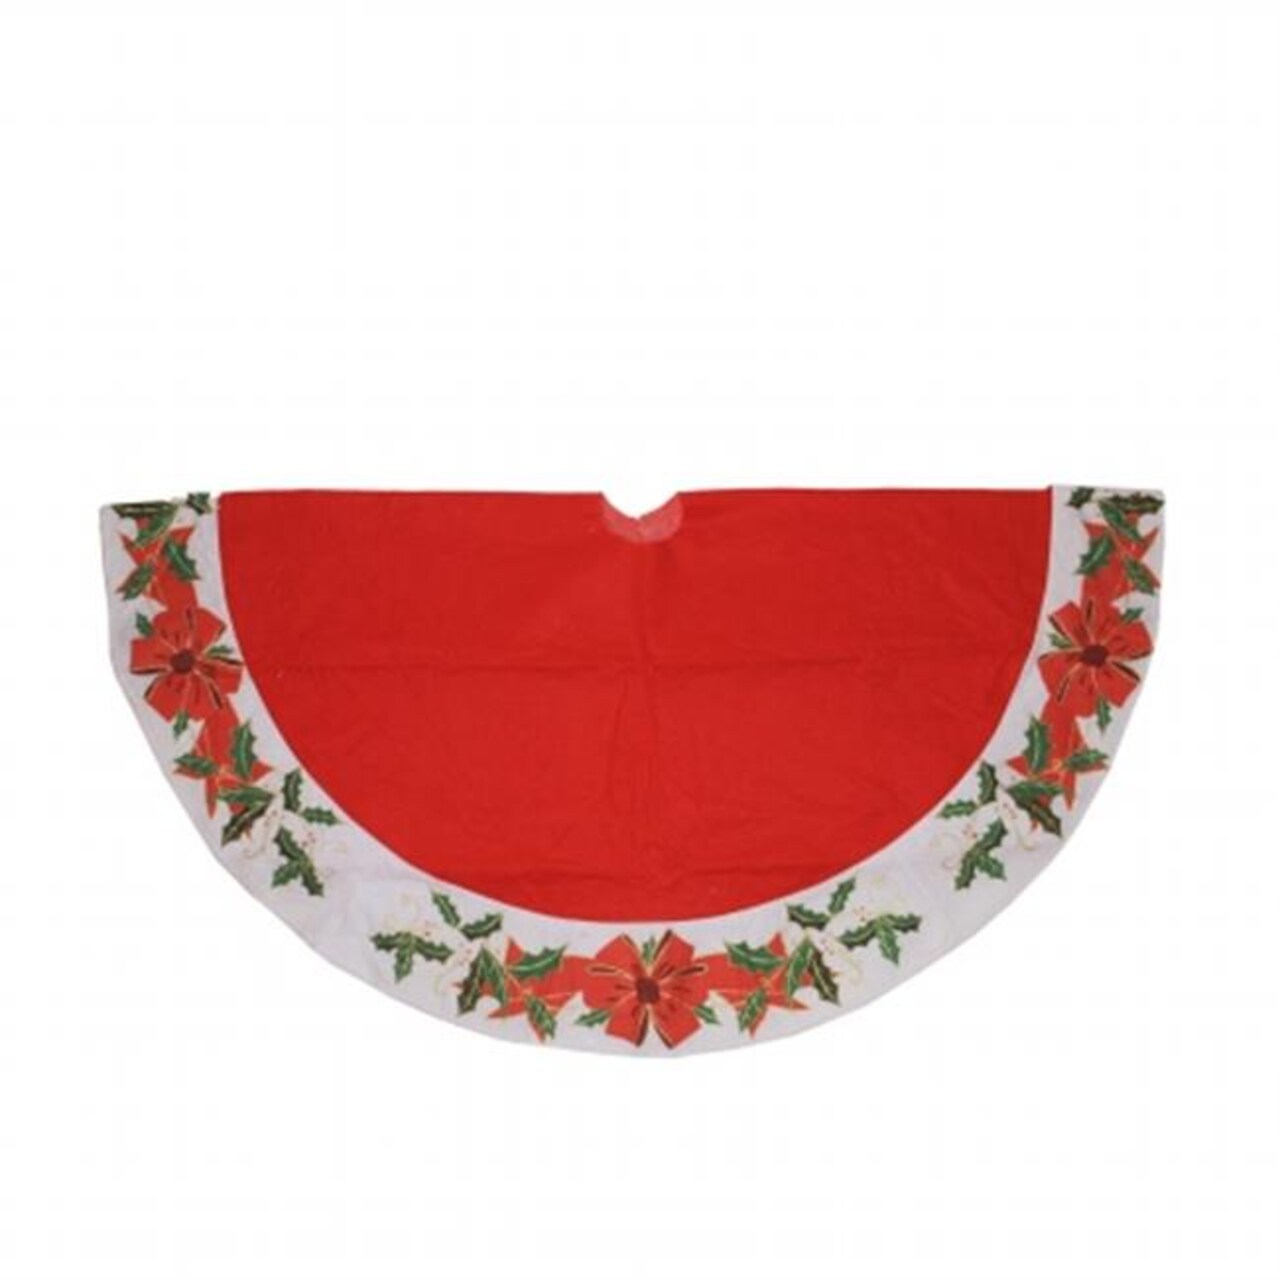 Northlight 32271624 48 in. Christmas Traditions Red with White Mistletoe Border Christmas Tree Skirt